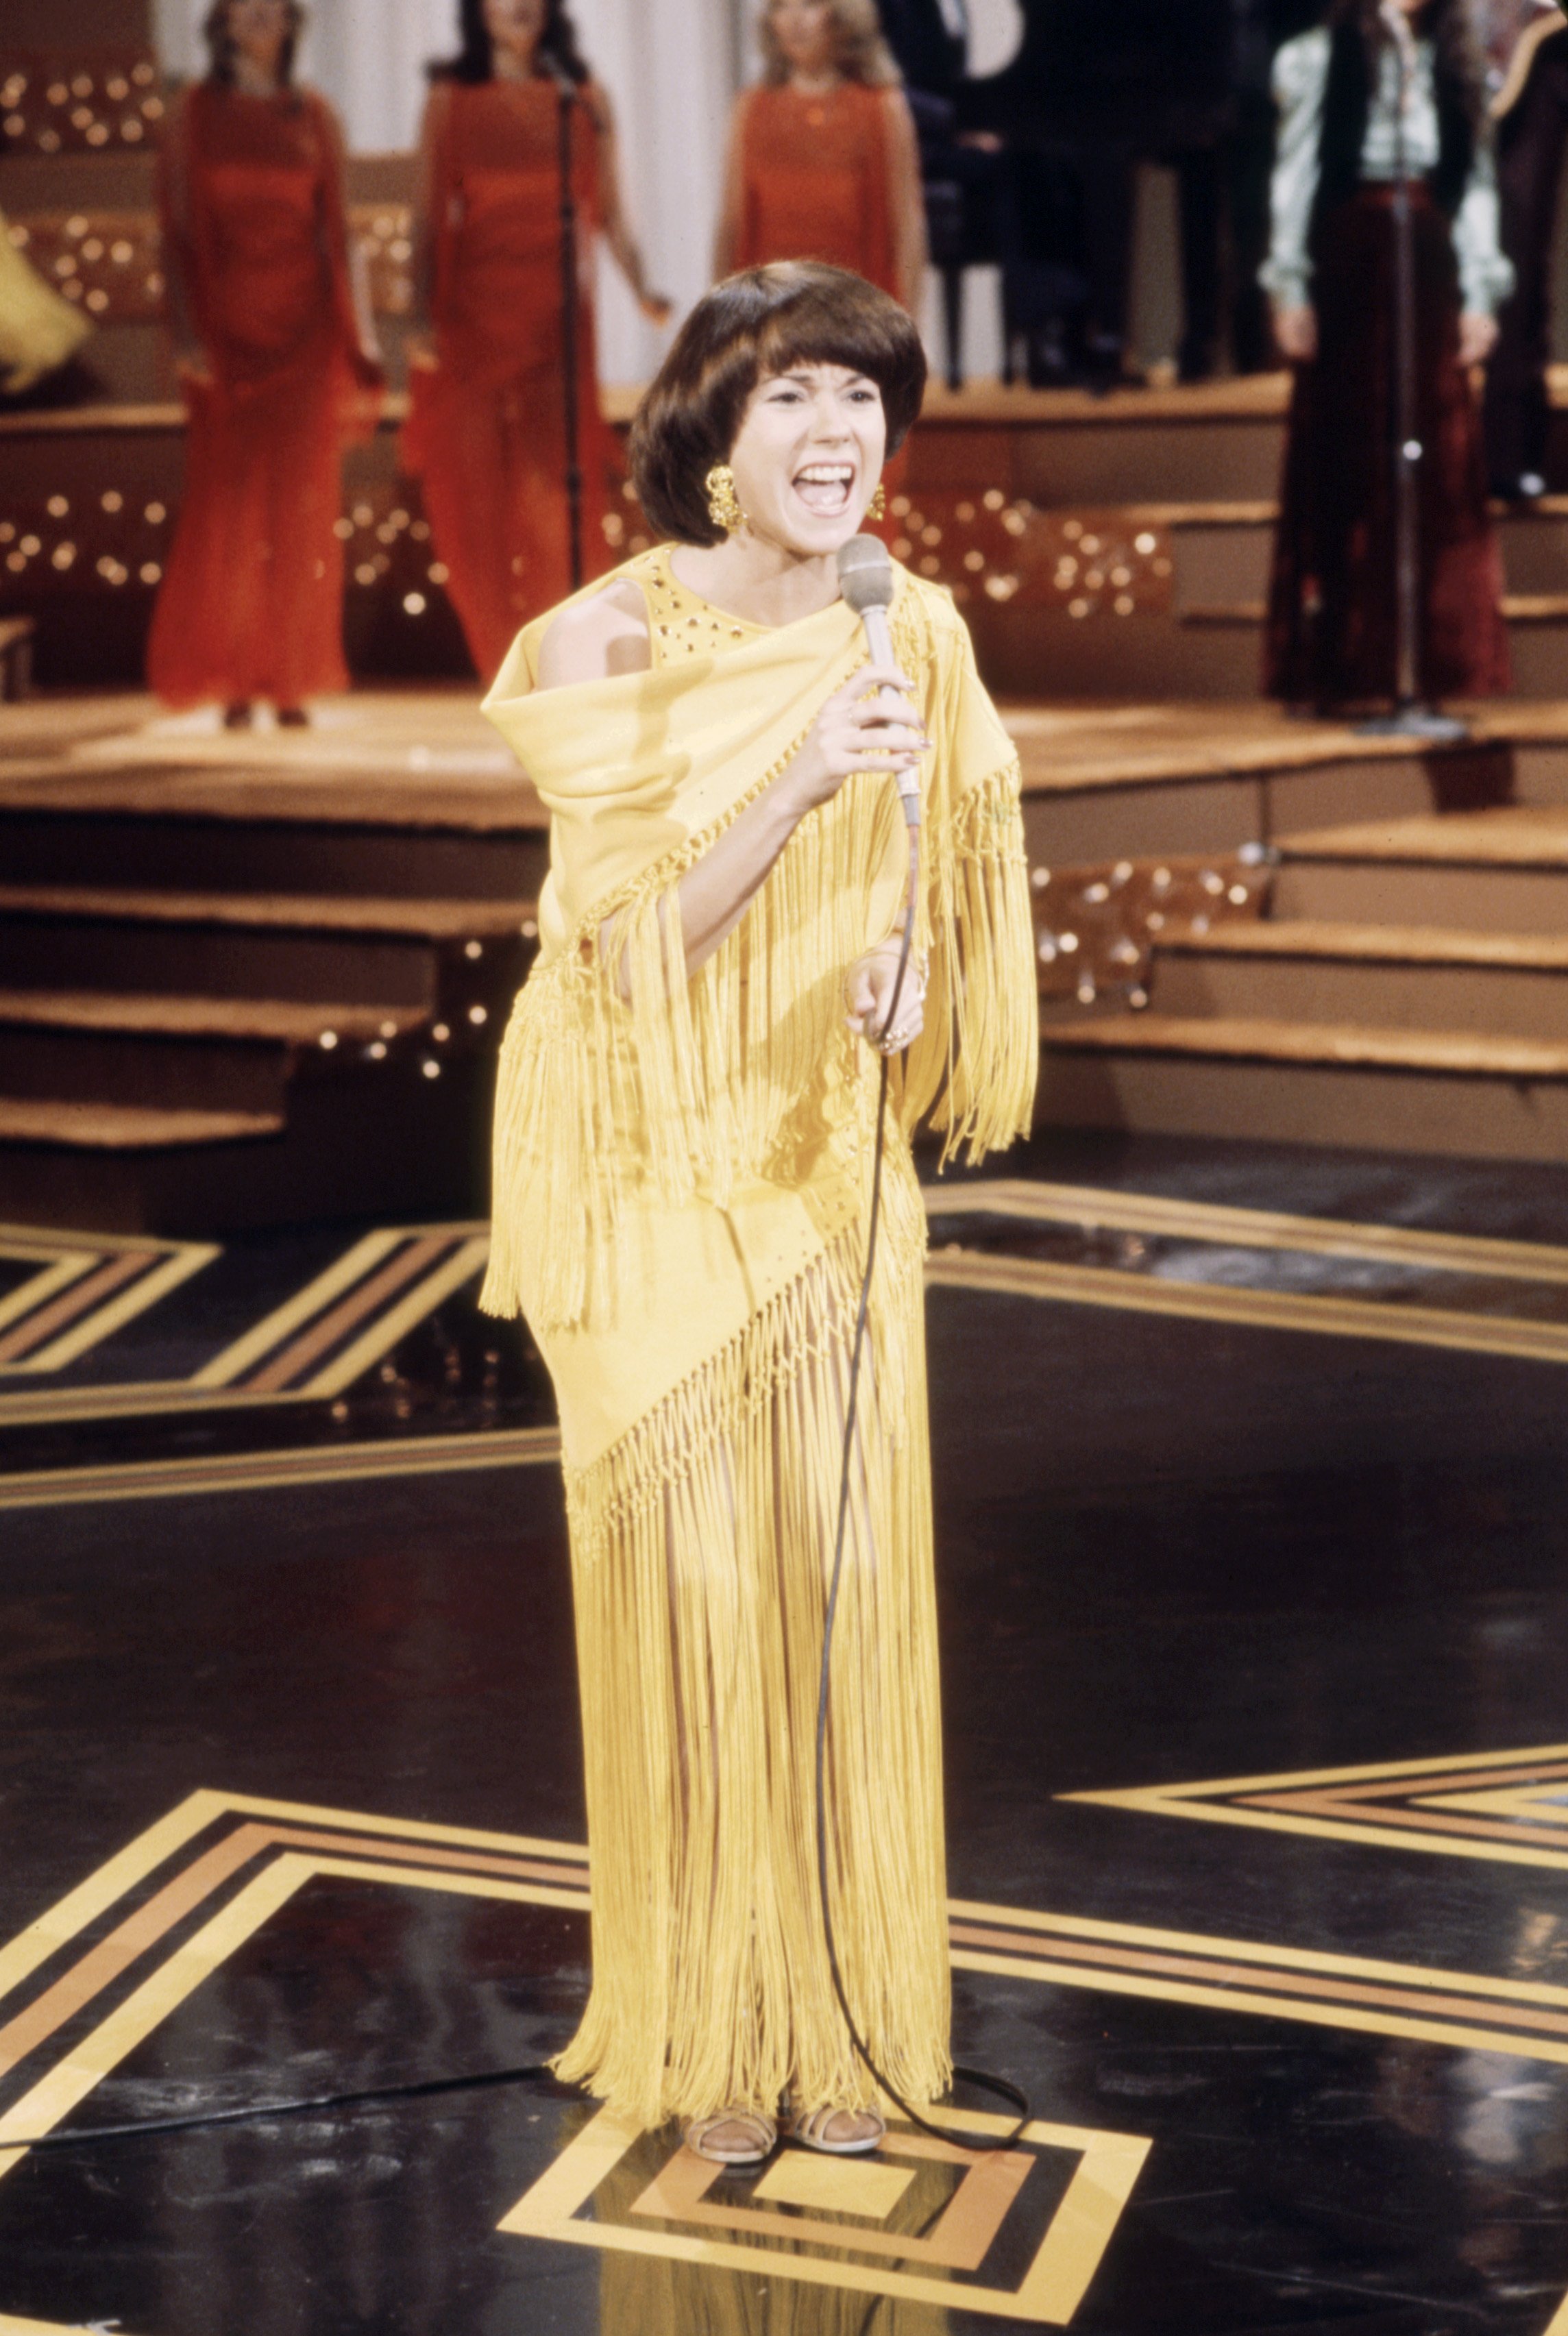 Kathie Lee Gifford as Kathie Epstein performing on the pilot for the series "Constantinople" in 1977 in Los Angeles. | Source: American Broadcasting Companies/Getty Images